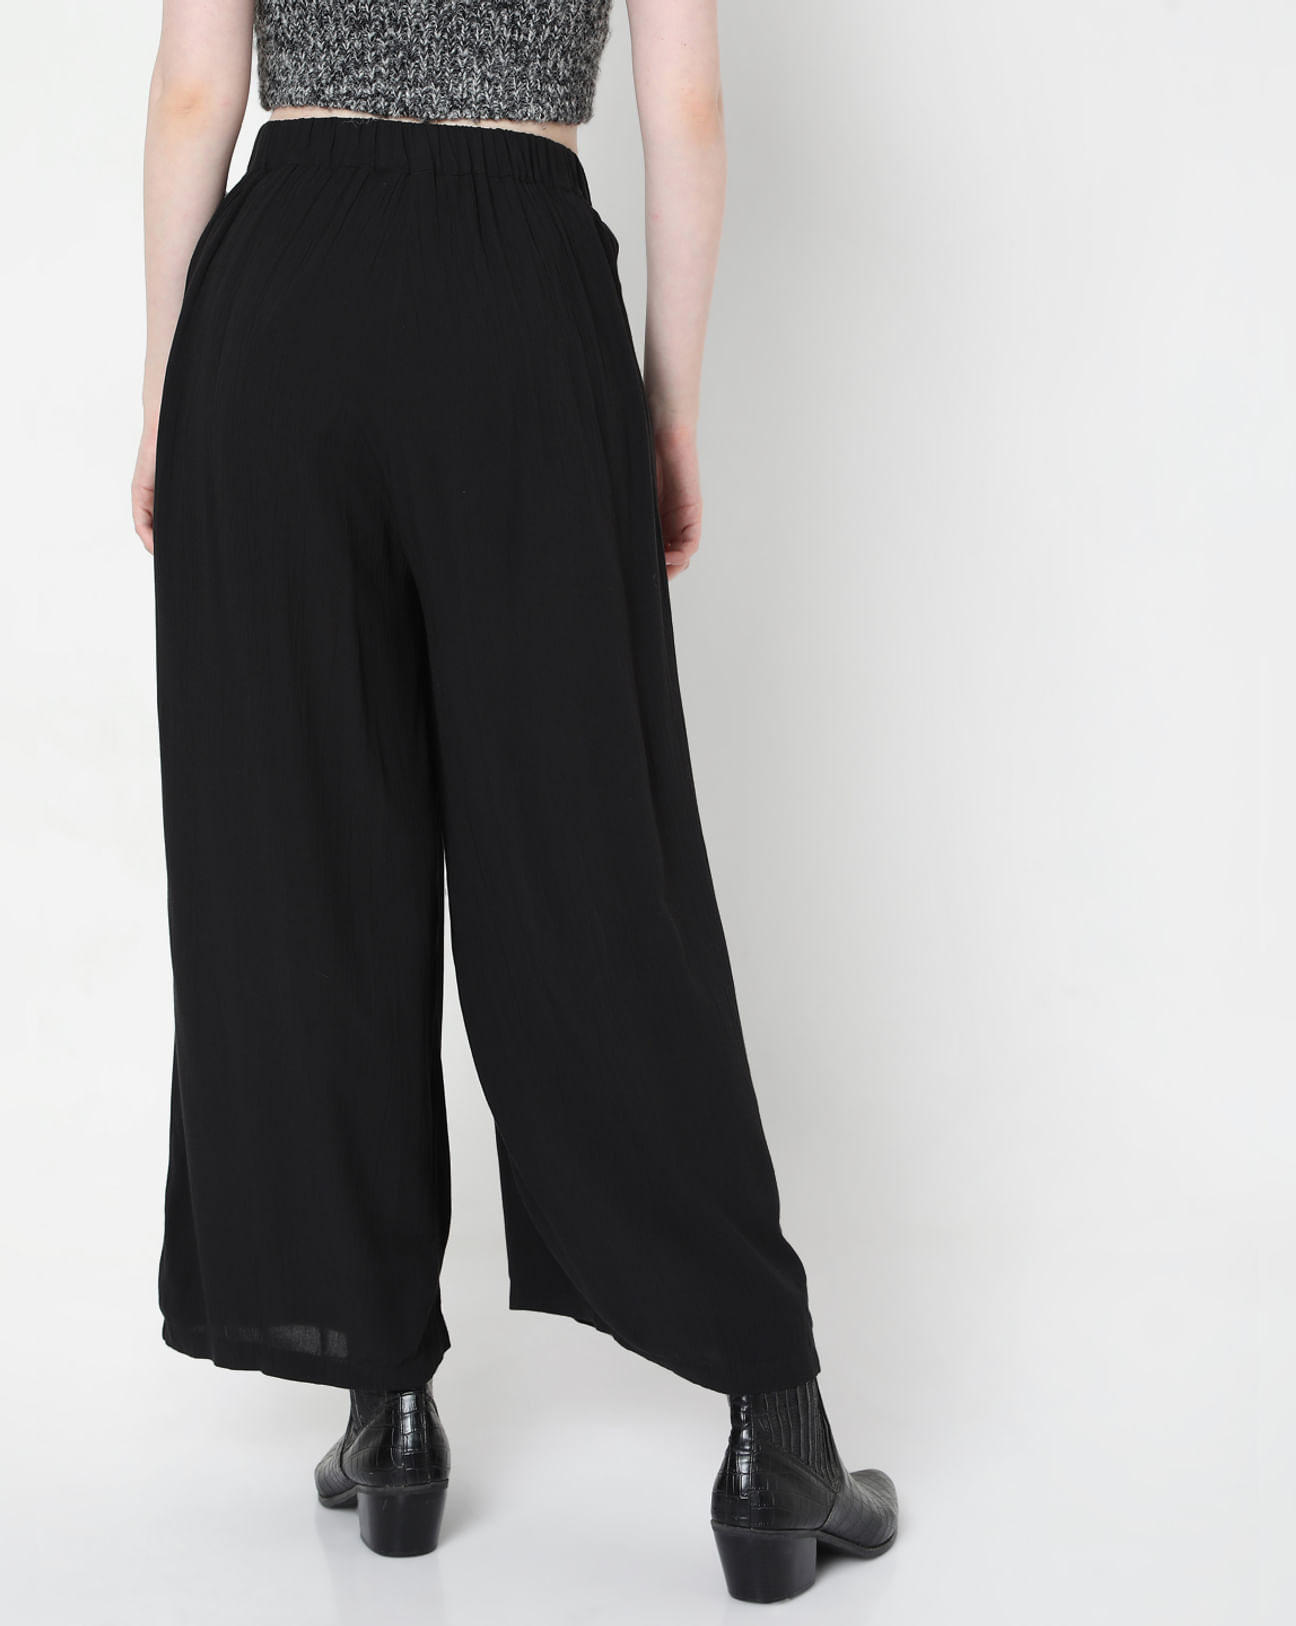 The Crawford Palazzo Pants in Black